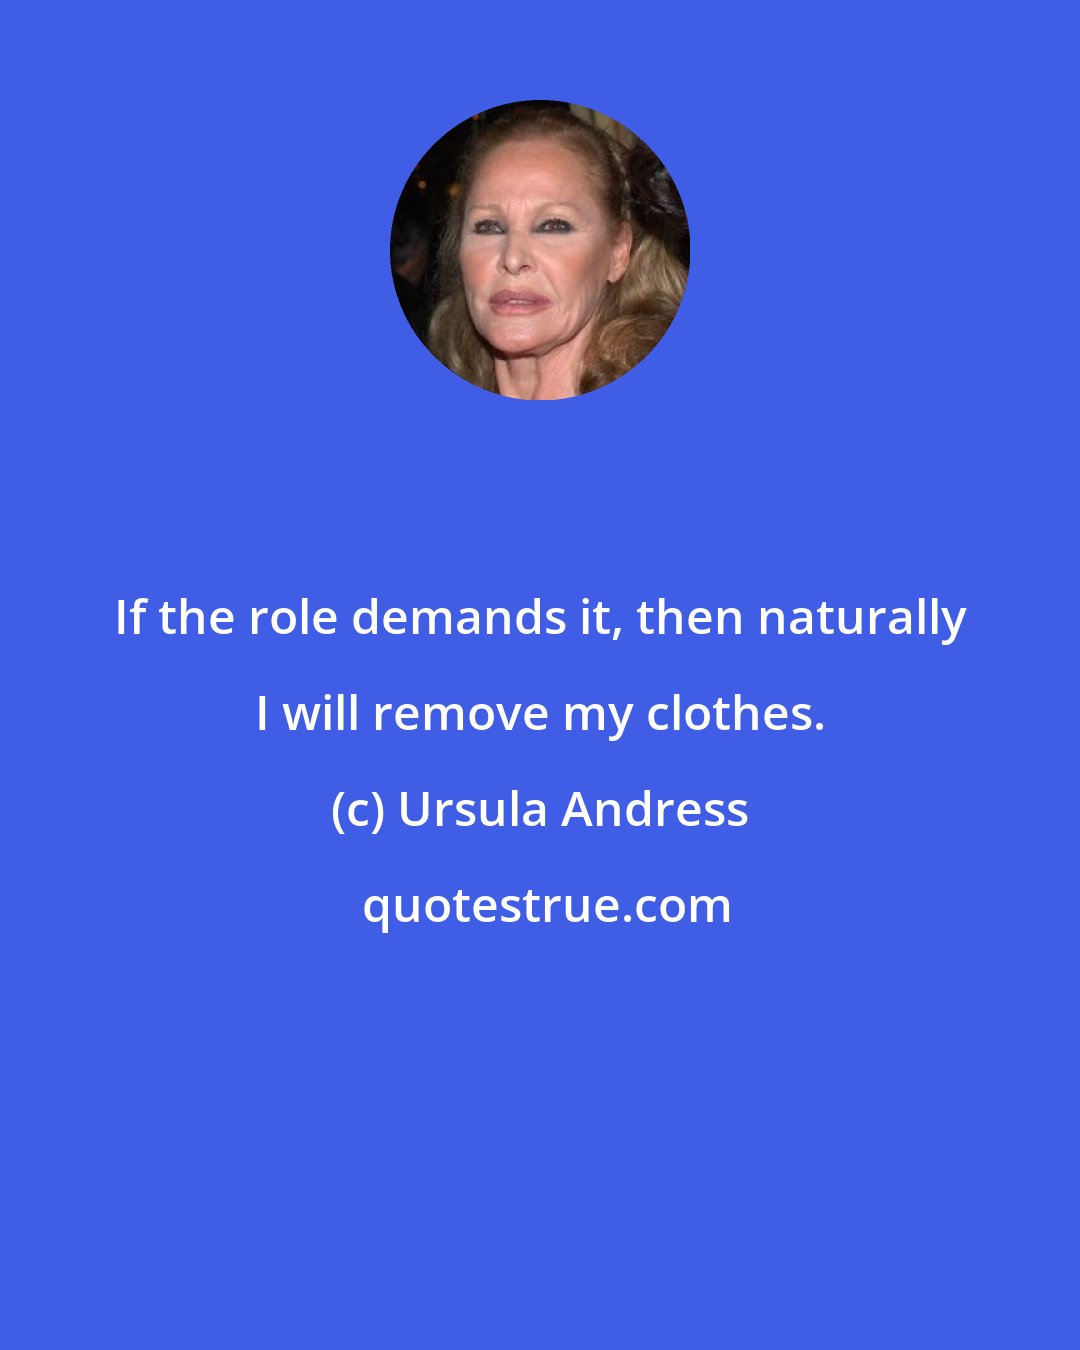 Ursula Andress: If the role demands it, then naturally I will remove my clothes.